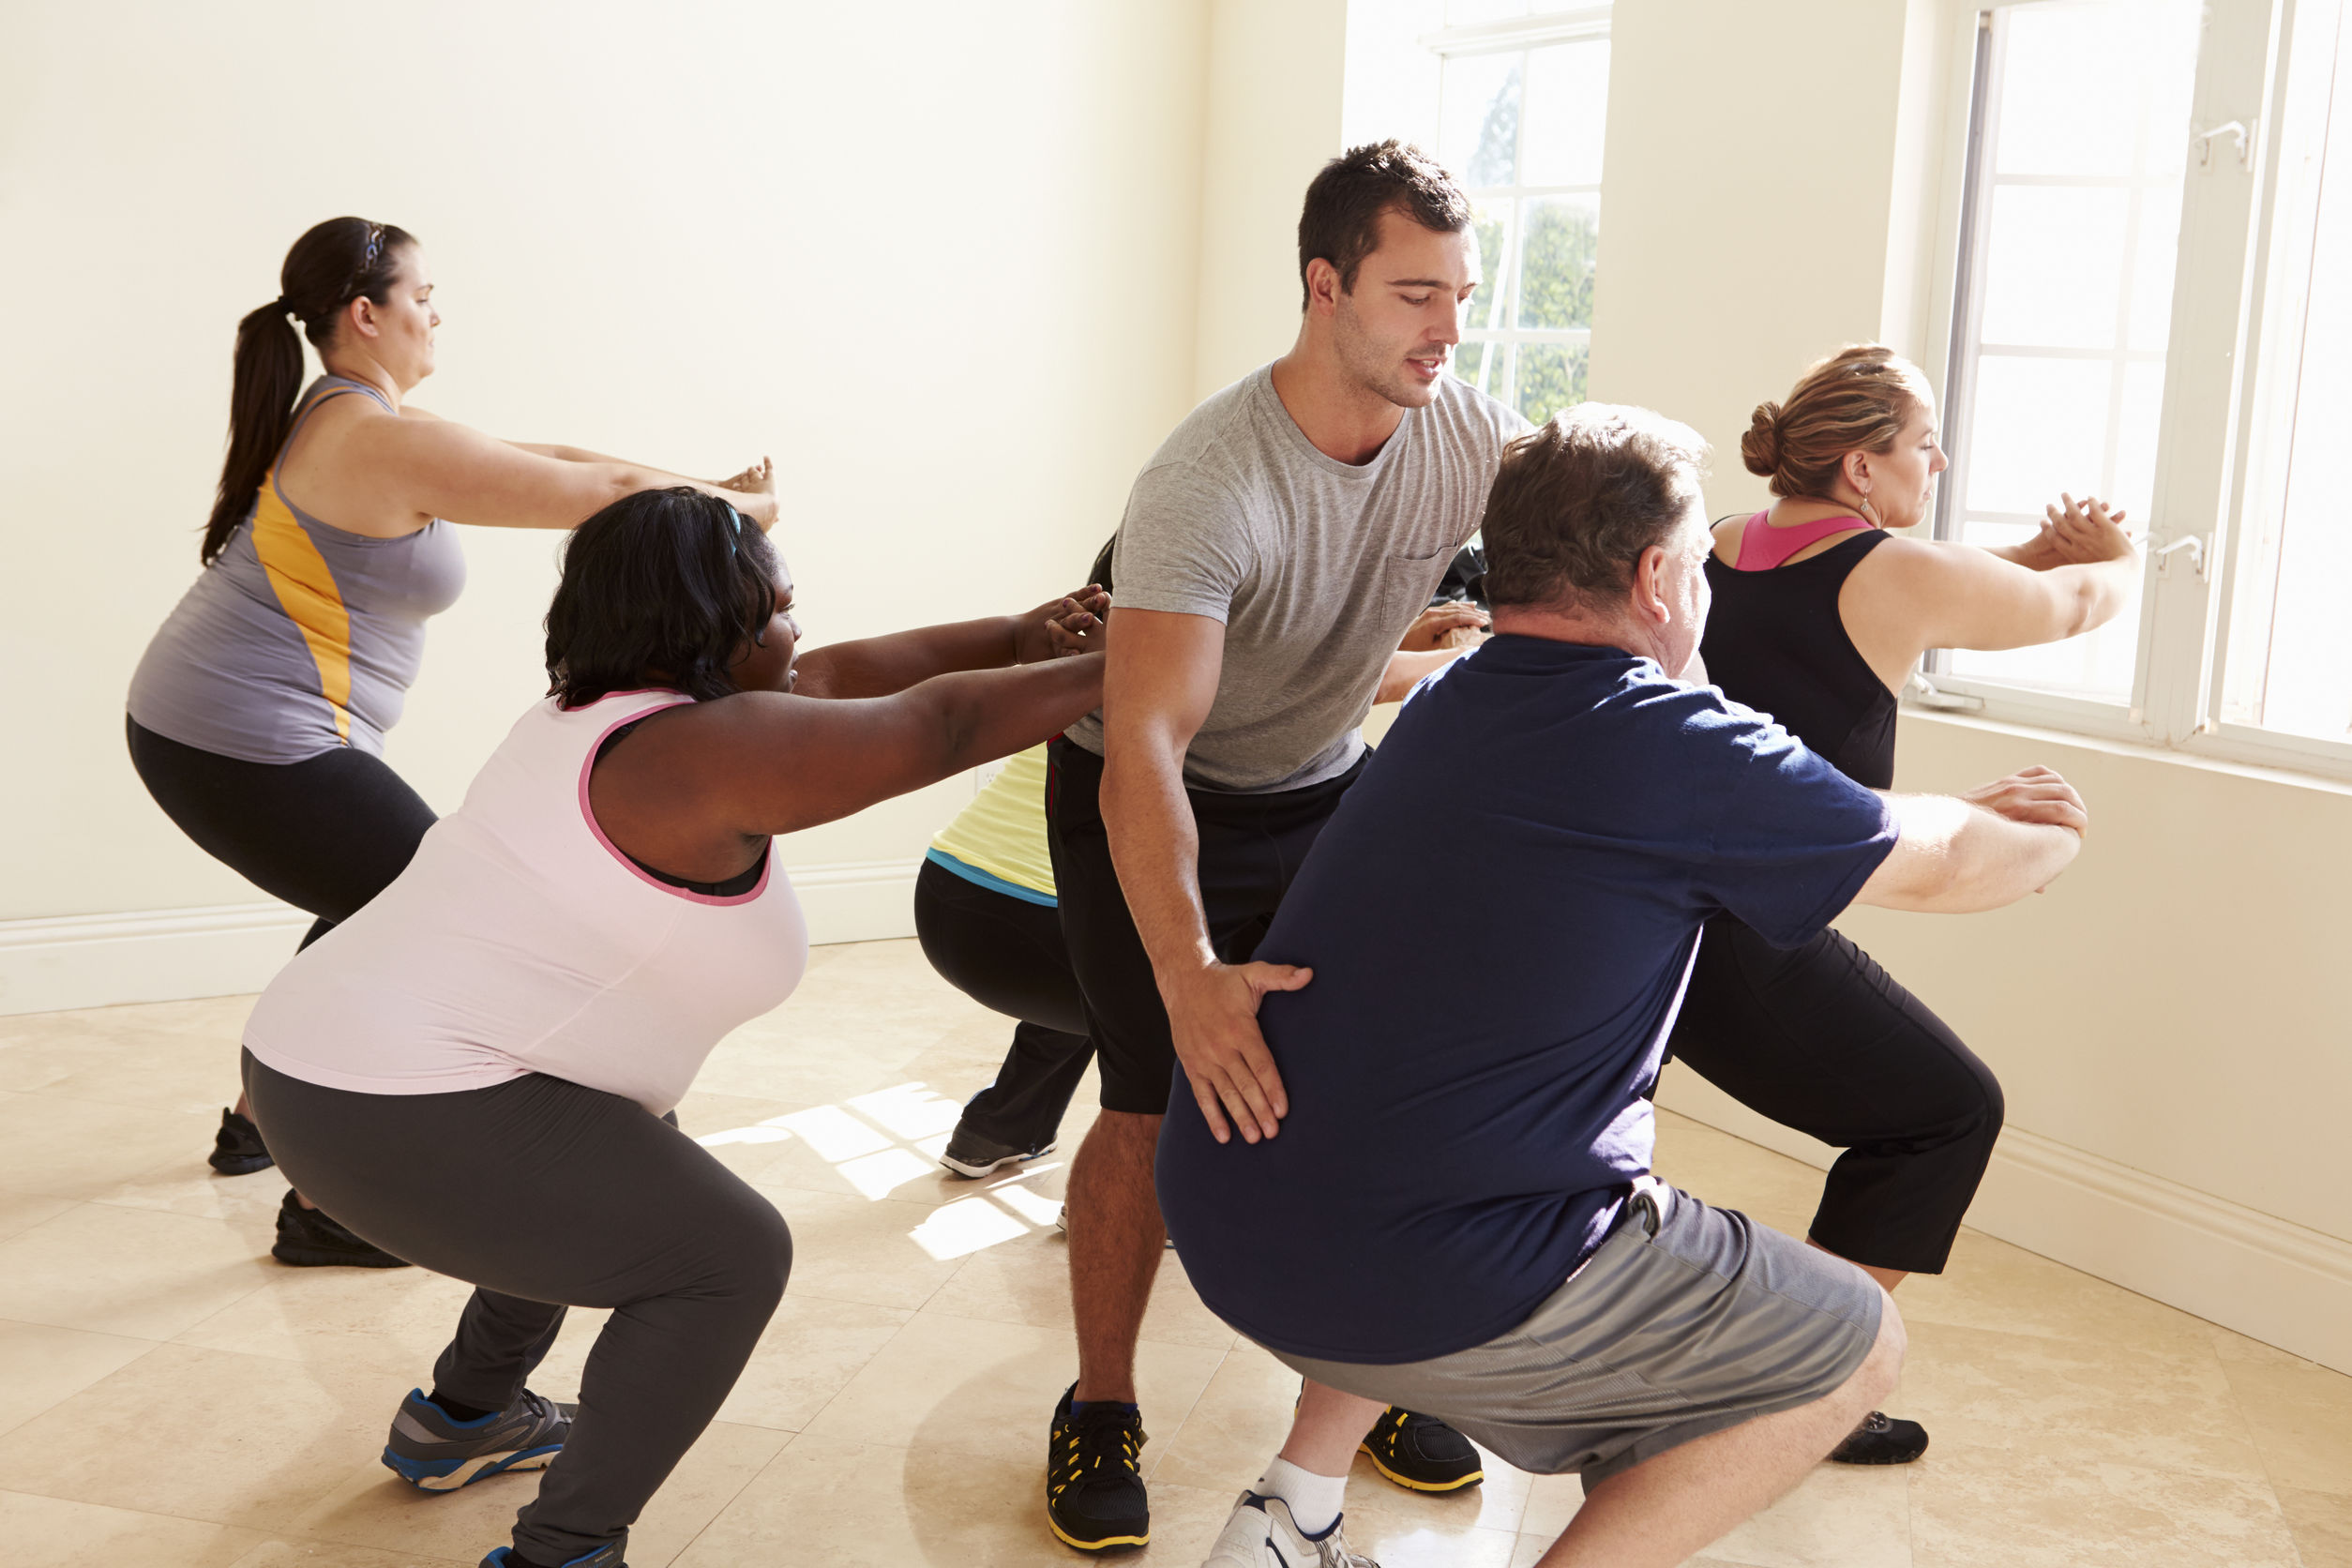 Exercise group class. https://www.info-on-high-blood-pressure.com/fitness.html